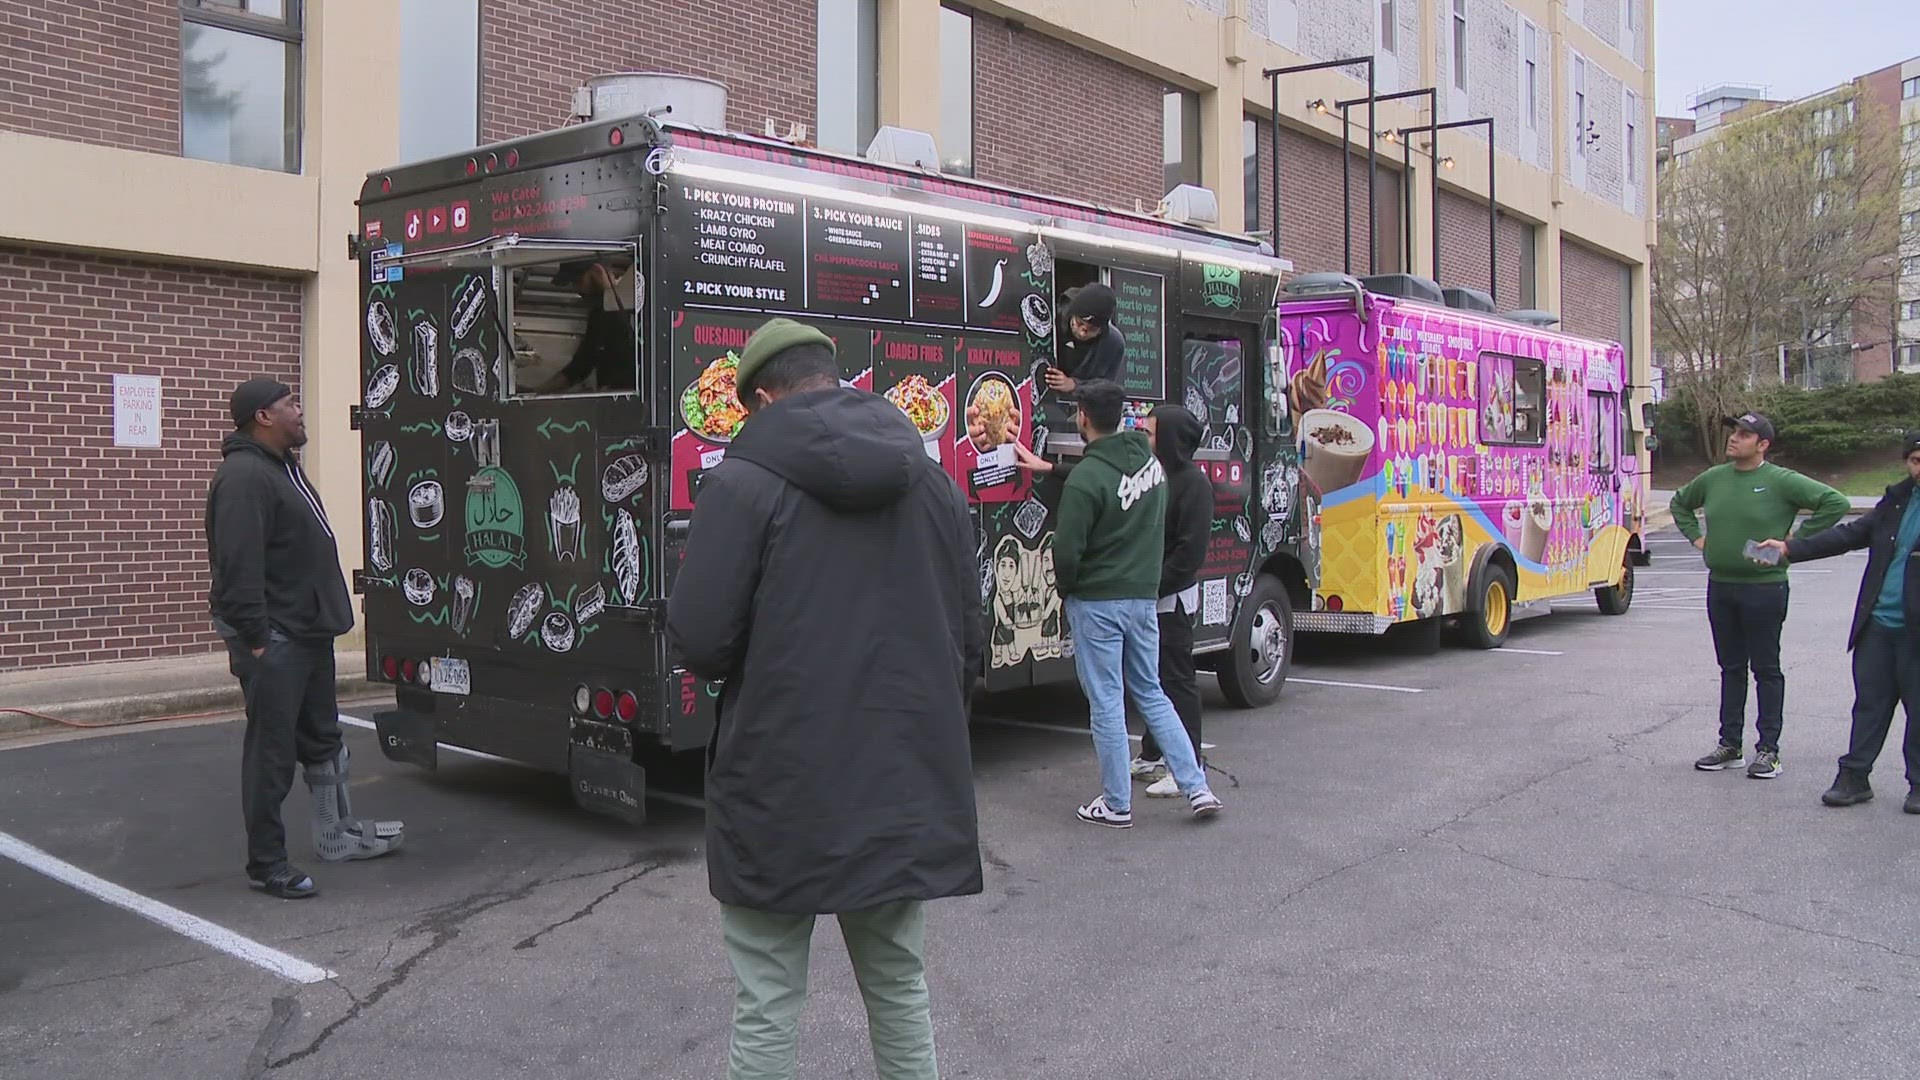 It looks like changes could be coming to the rules for food trucks in Alexandria.